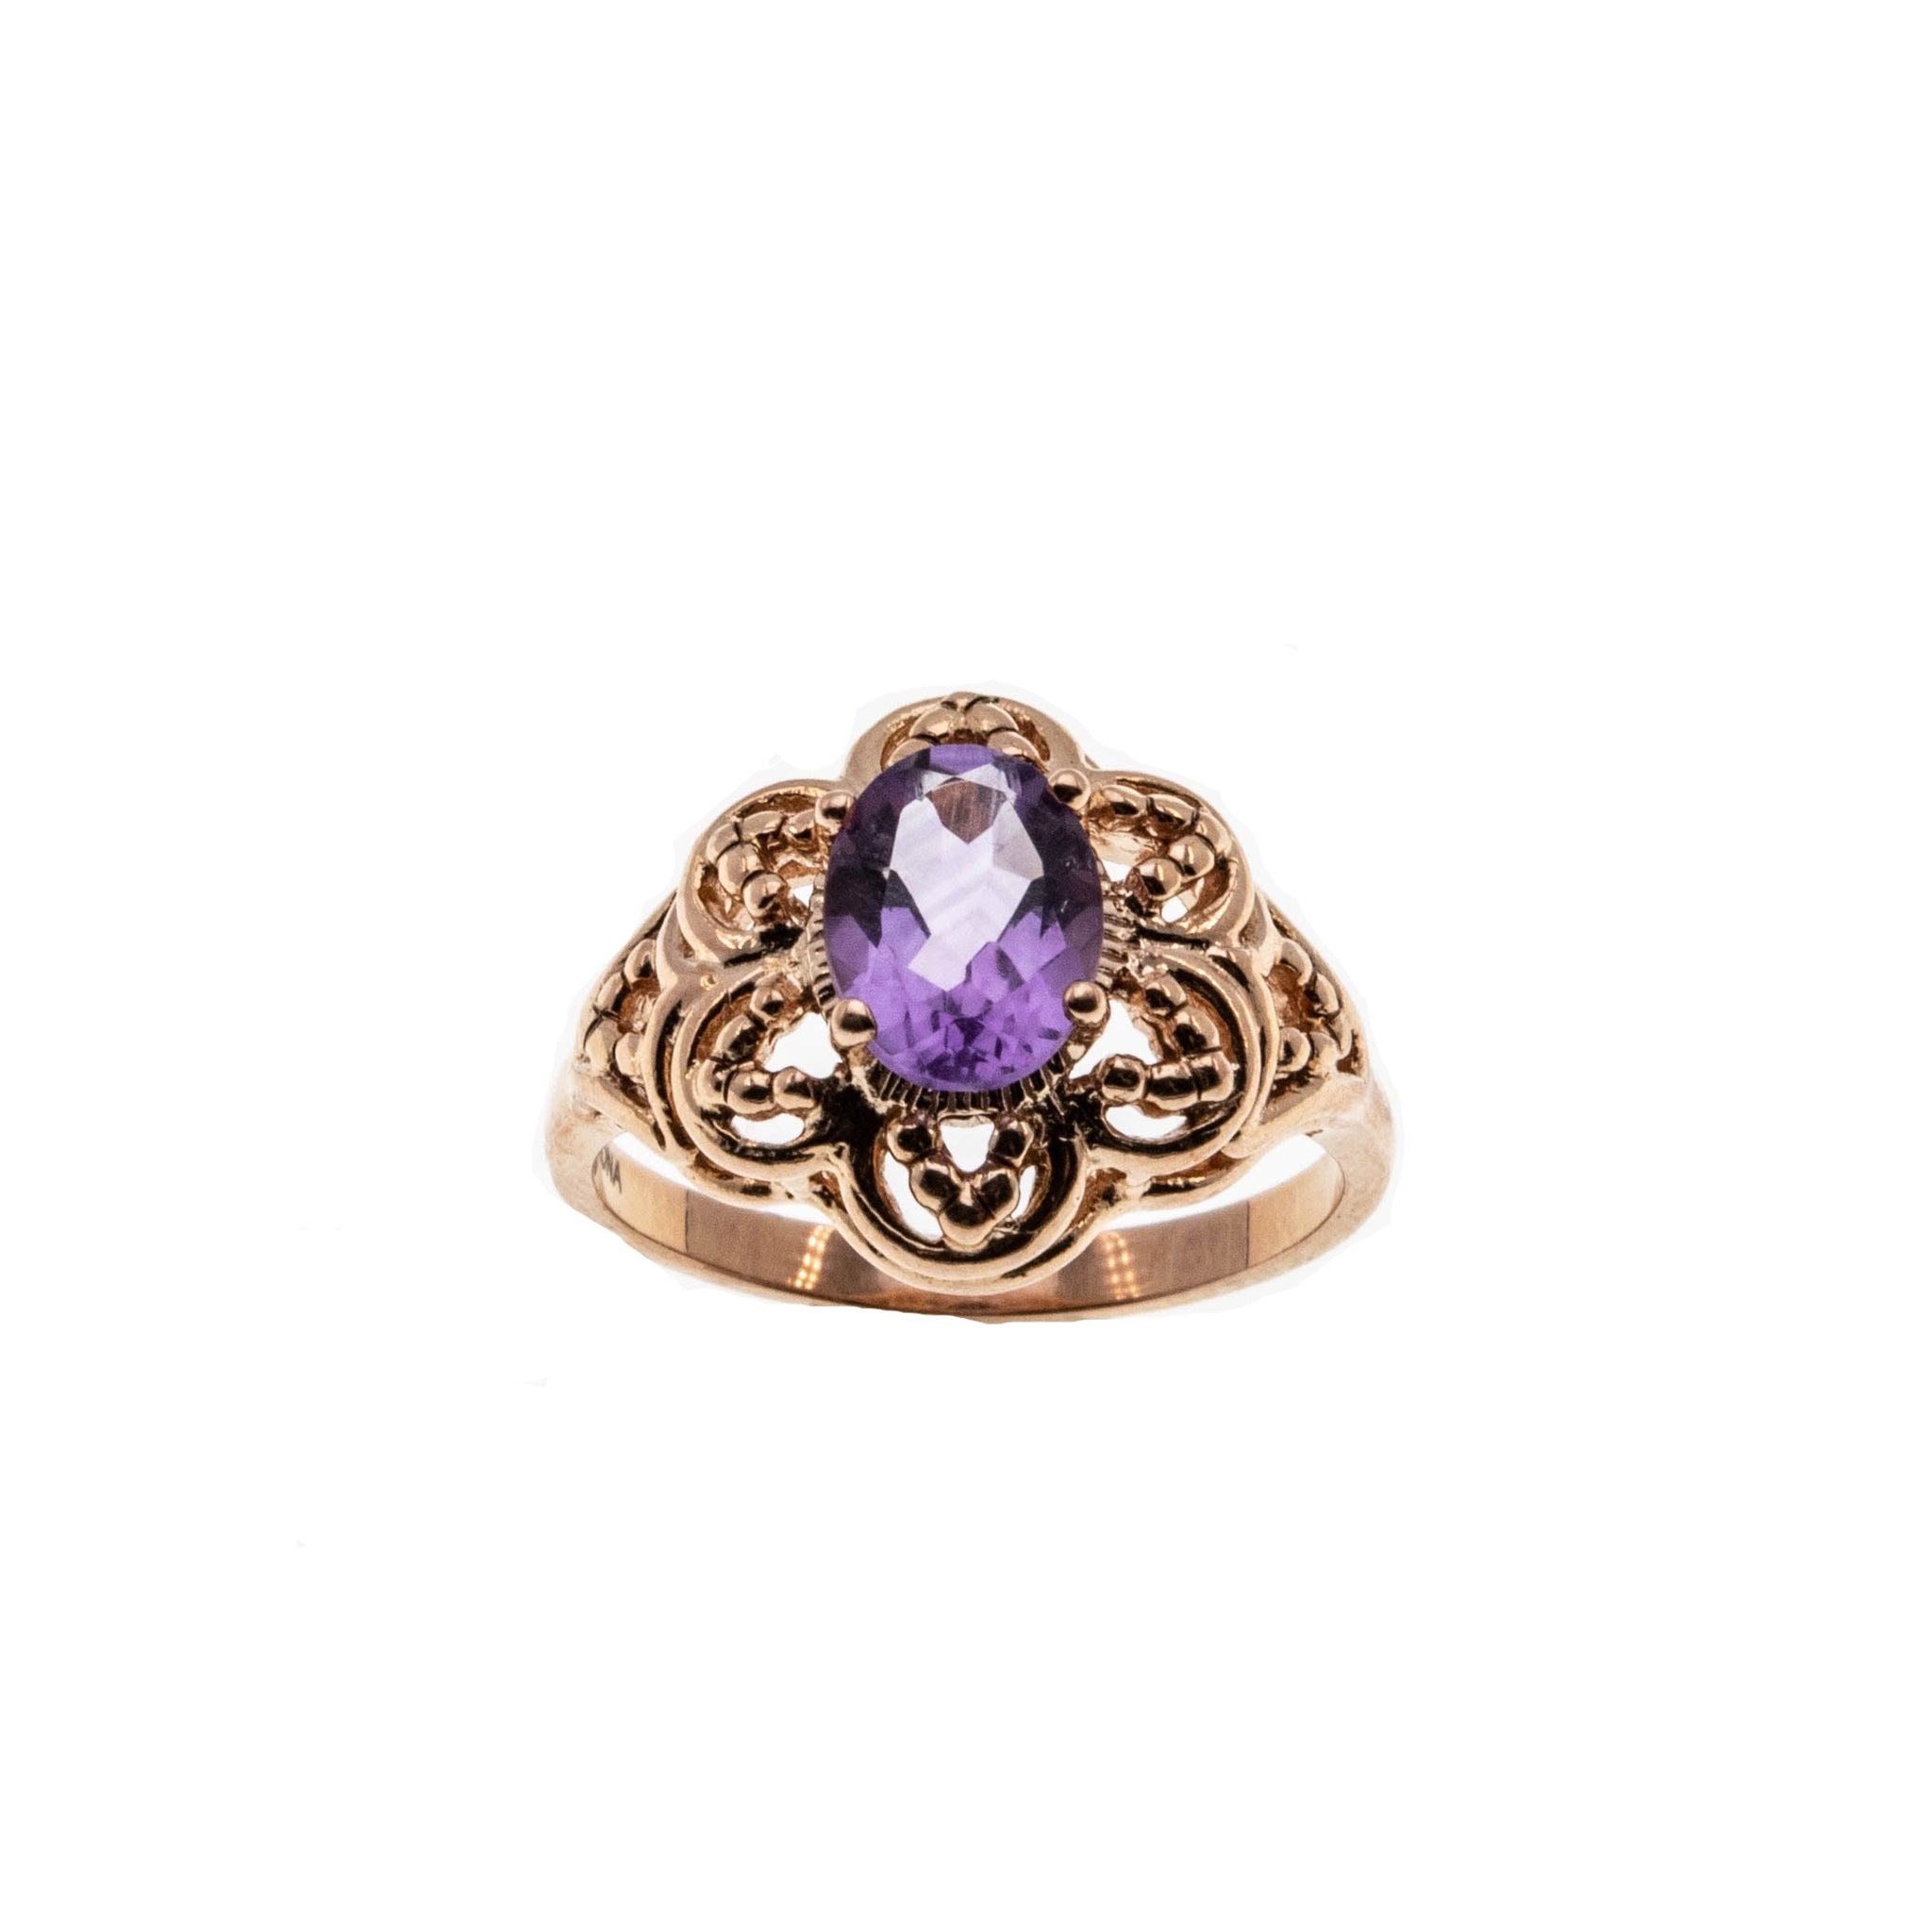 Blooming tear amethyst ring in rose gold plating